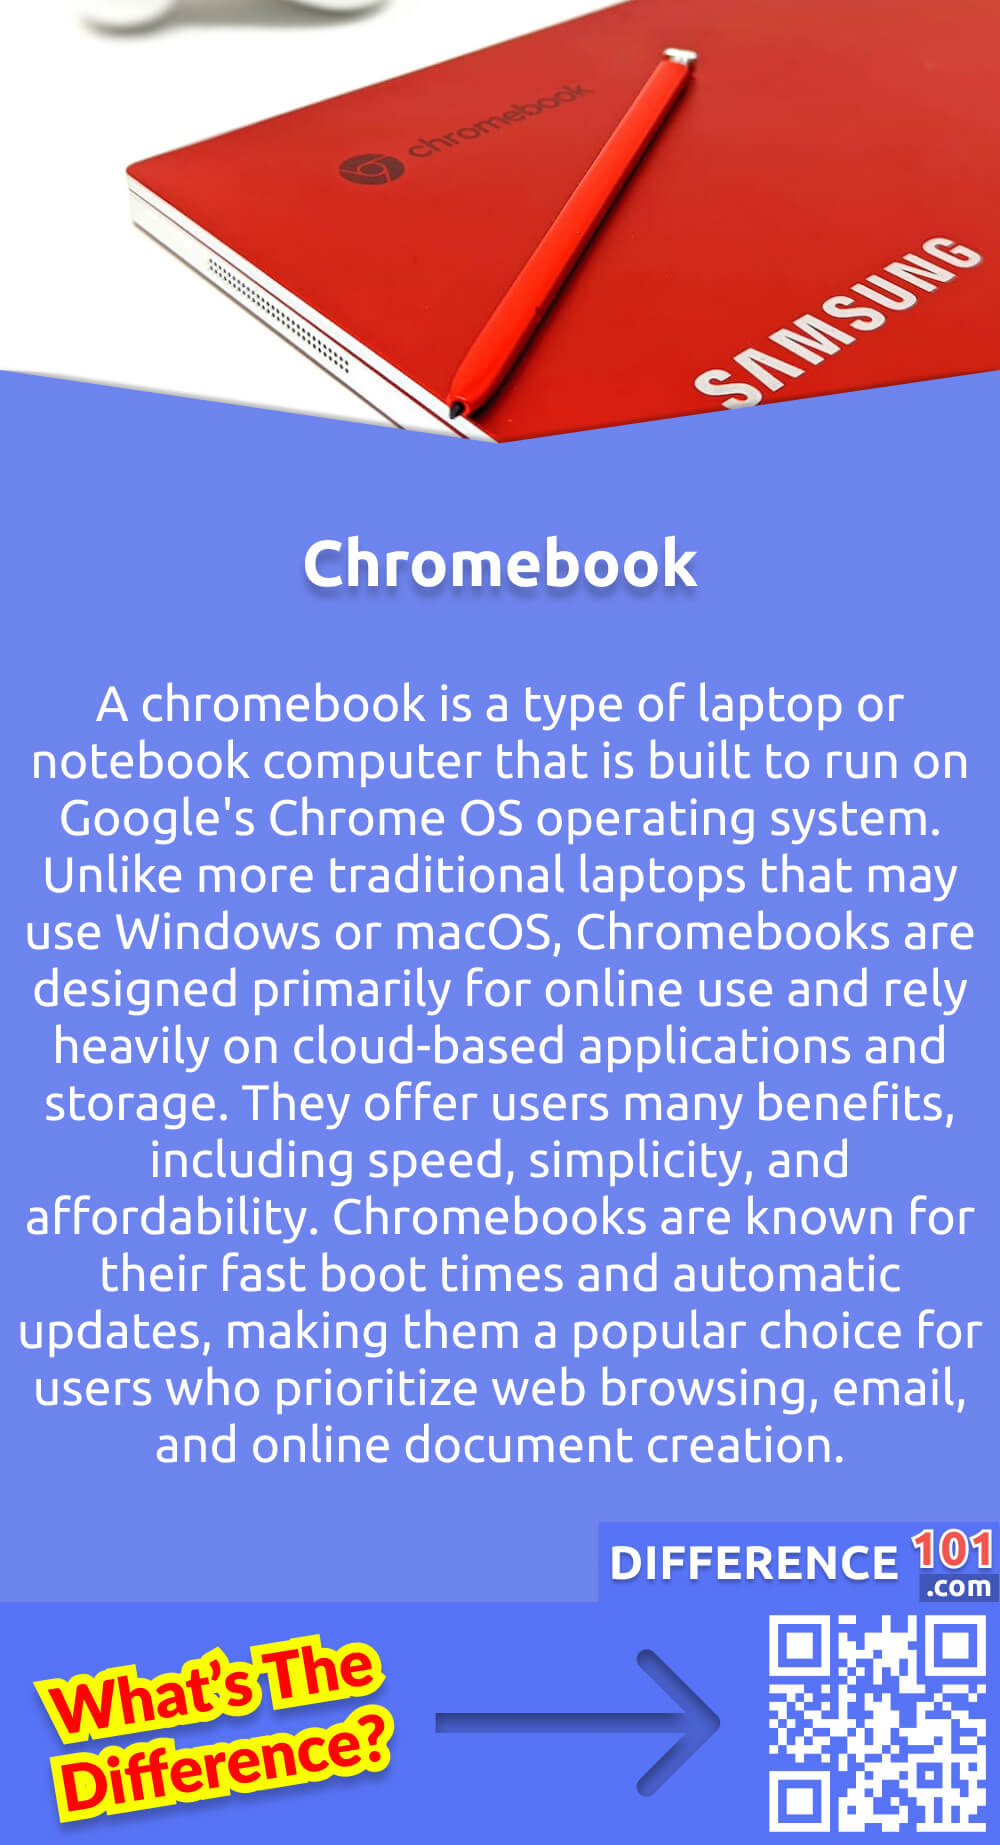 What Is a Chromebook? A Chromebook is a type of laptop or notebook computer that is built to run on Google's Chrome OS operating system. Unlike more traditional laptops that may use Windows or macOS, Chromebooks are designed primarily for online use and rely heavily on cloud-based applications and storage. They offer users many benefits, including speed, simplicity, and affordability. Chromebooks are known for their fast boot times and automatic updates, making them a popular choice for users who prioritize web browsing, email, and online document creation. Additionally, they come with built-in security features such as sandboxing of applications and automatic malware scanning. Overall, Chromebooks are an excellent choice for students, casual users, and anyone who primarily uses web-based applications in their day-to-day lives.